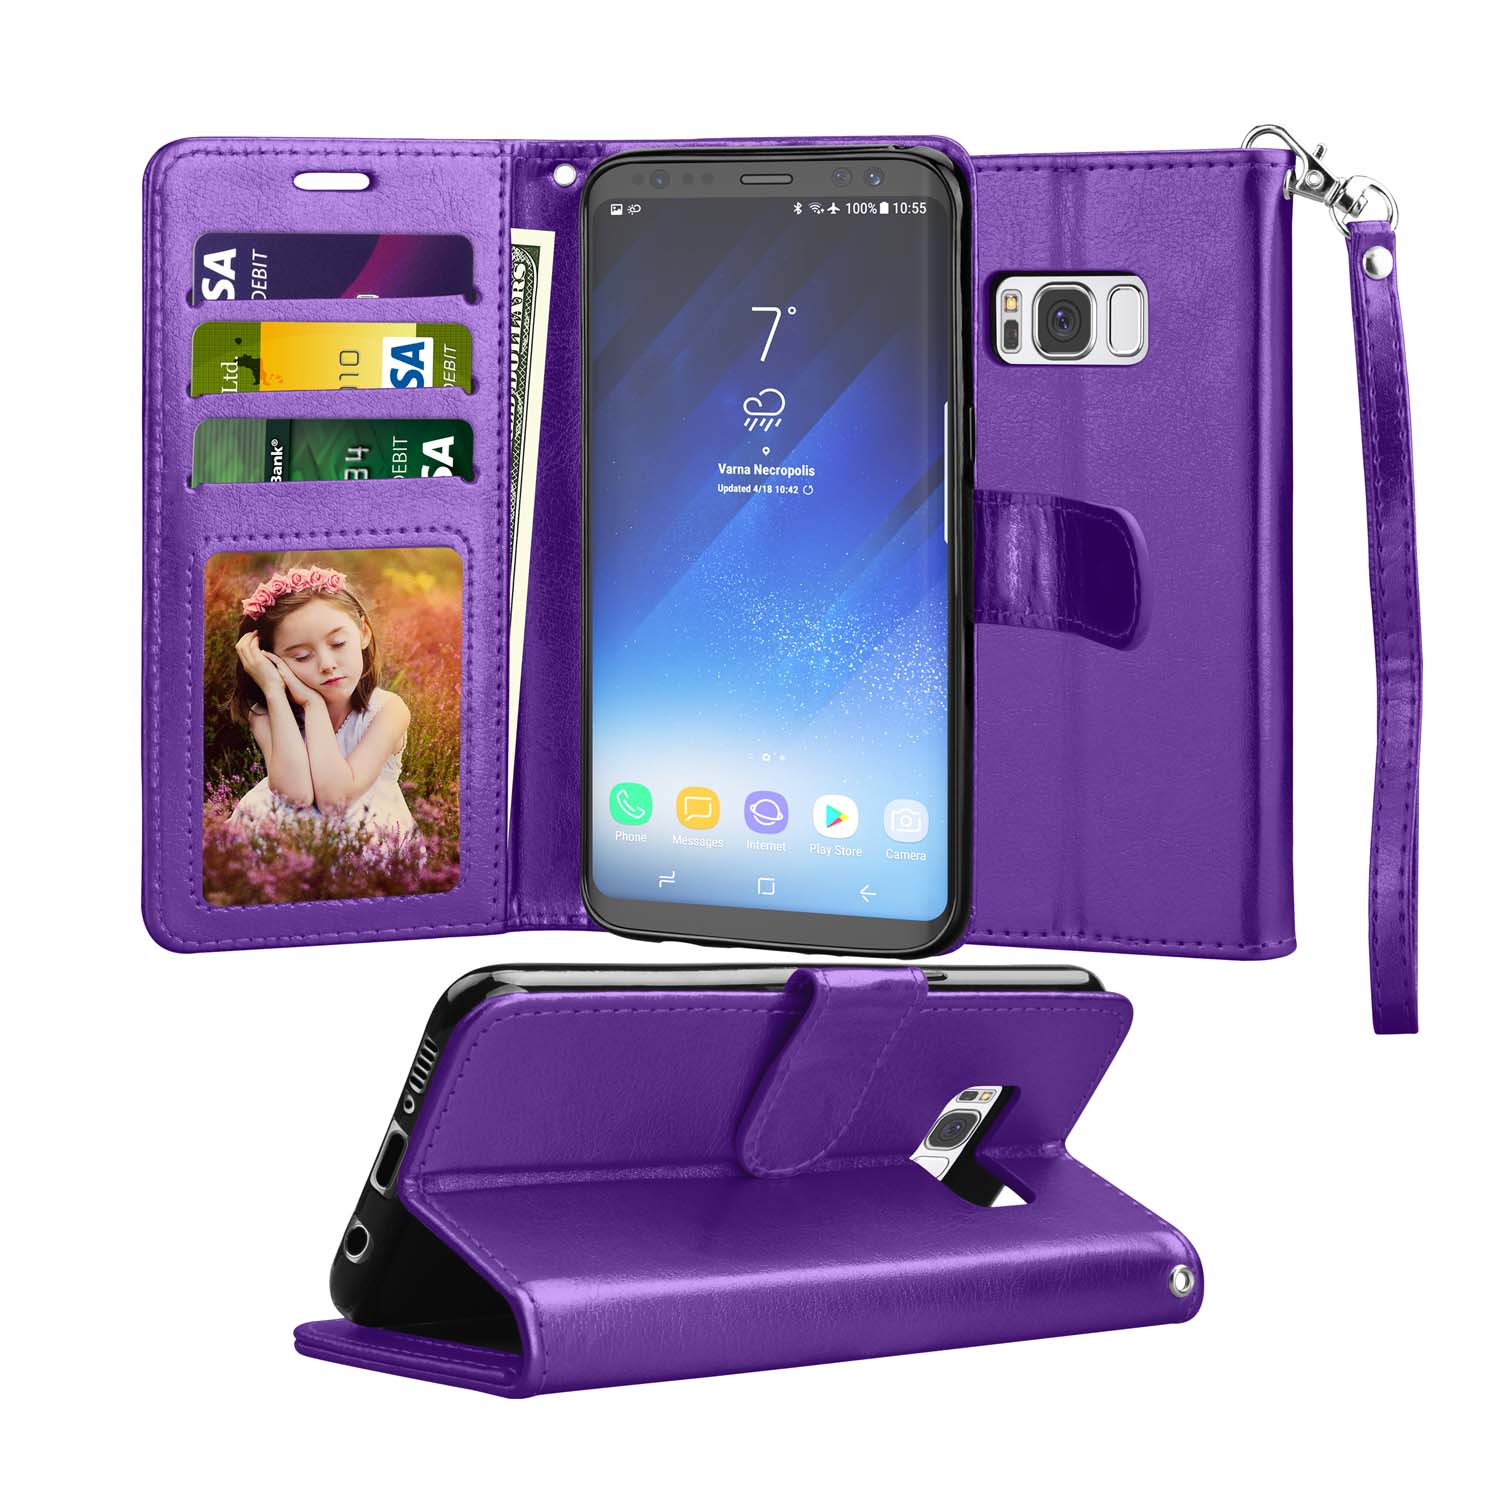 Tekcoo Galaxy S8 / S8 Plus Wallet Case, for Galaxy S8 / S8+ PU Leather Case, Tekcoo [Purple] PU Leather [3 Card Slots] ID Credit Flip Cover [Kickstand] Cover & Wrist Strap - image 1 of 5